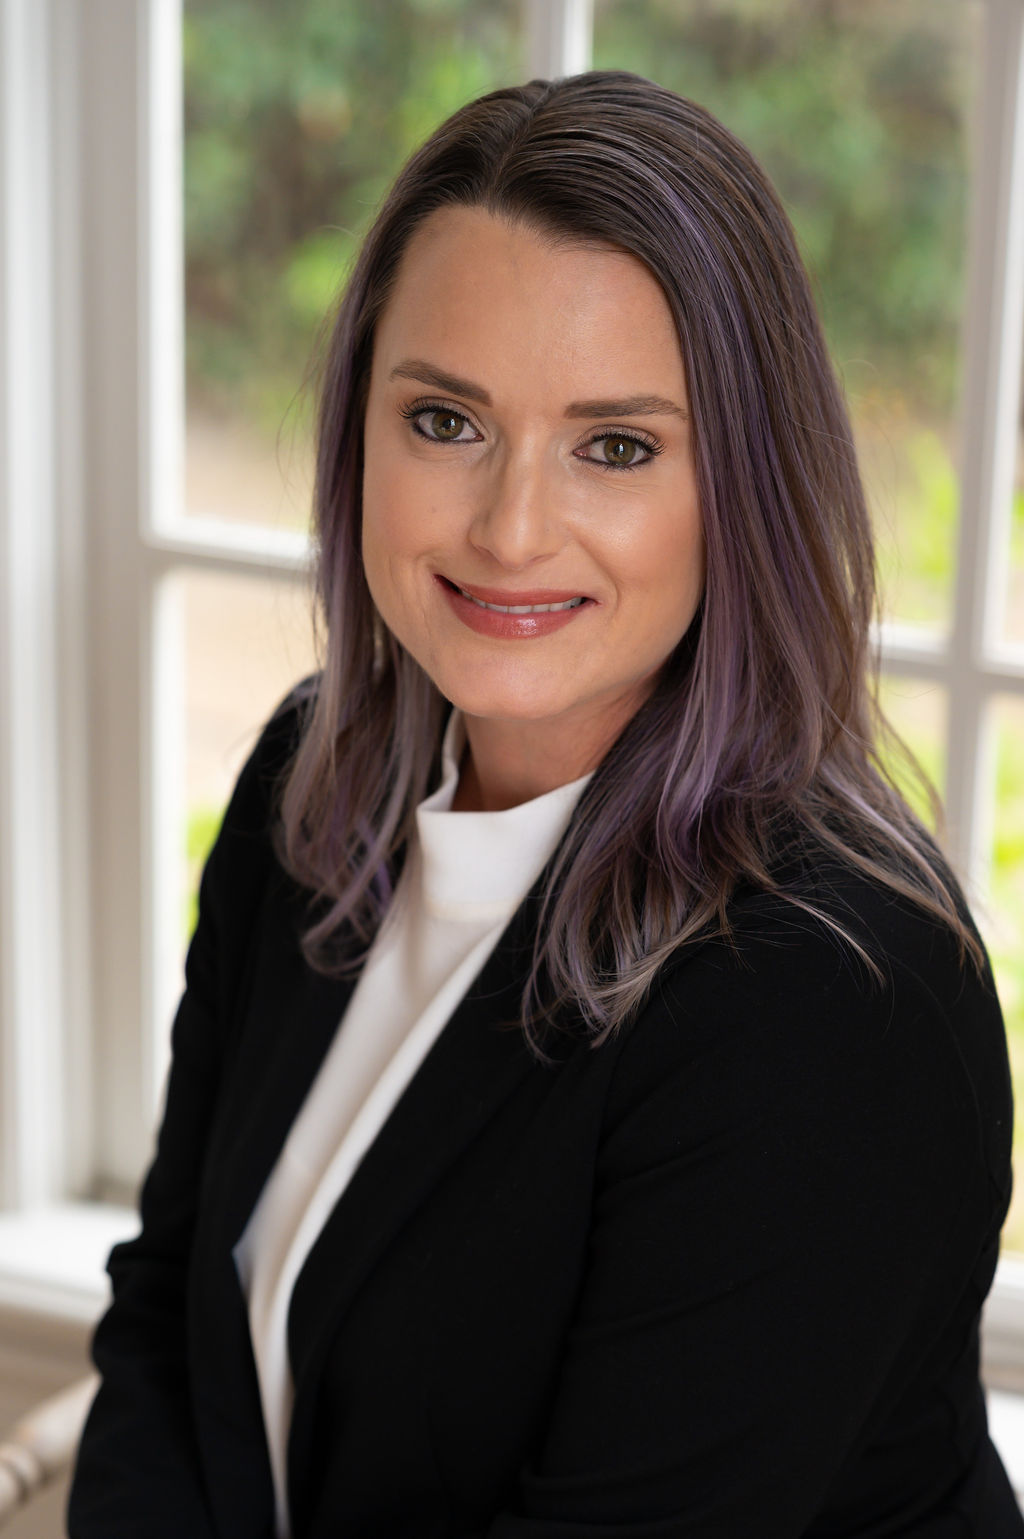 Jessica Fritz - Personal Family Law Attorney Serving Houston Texas Areas